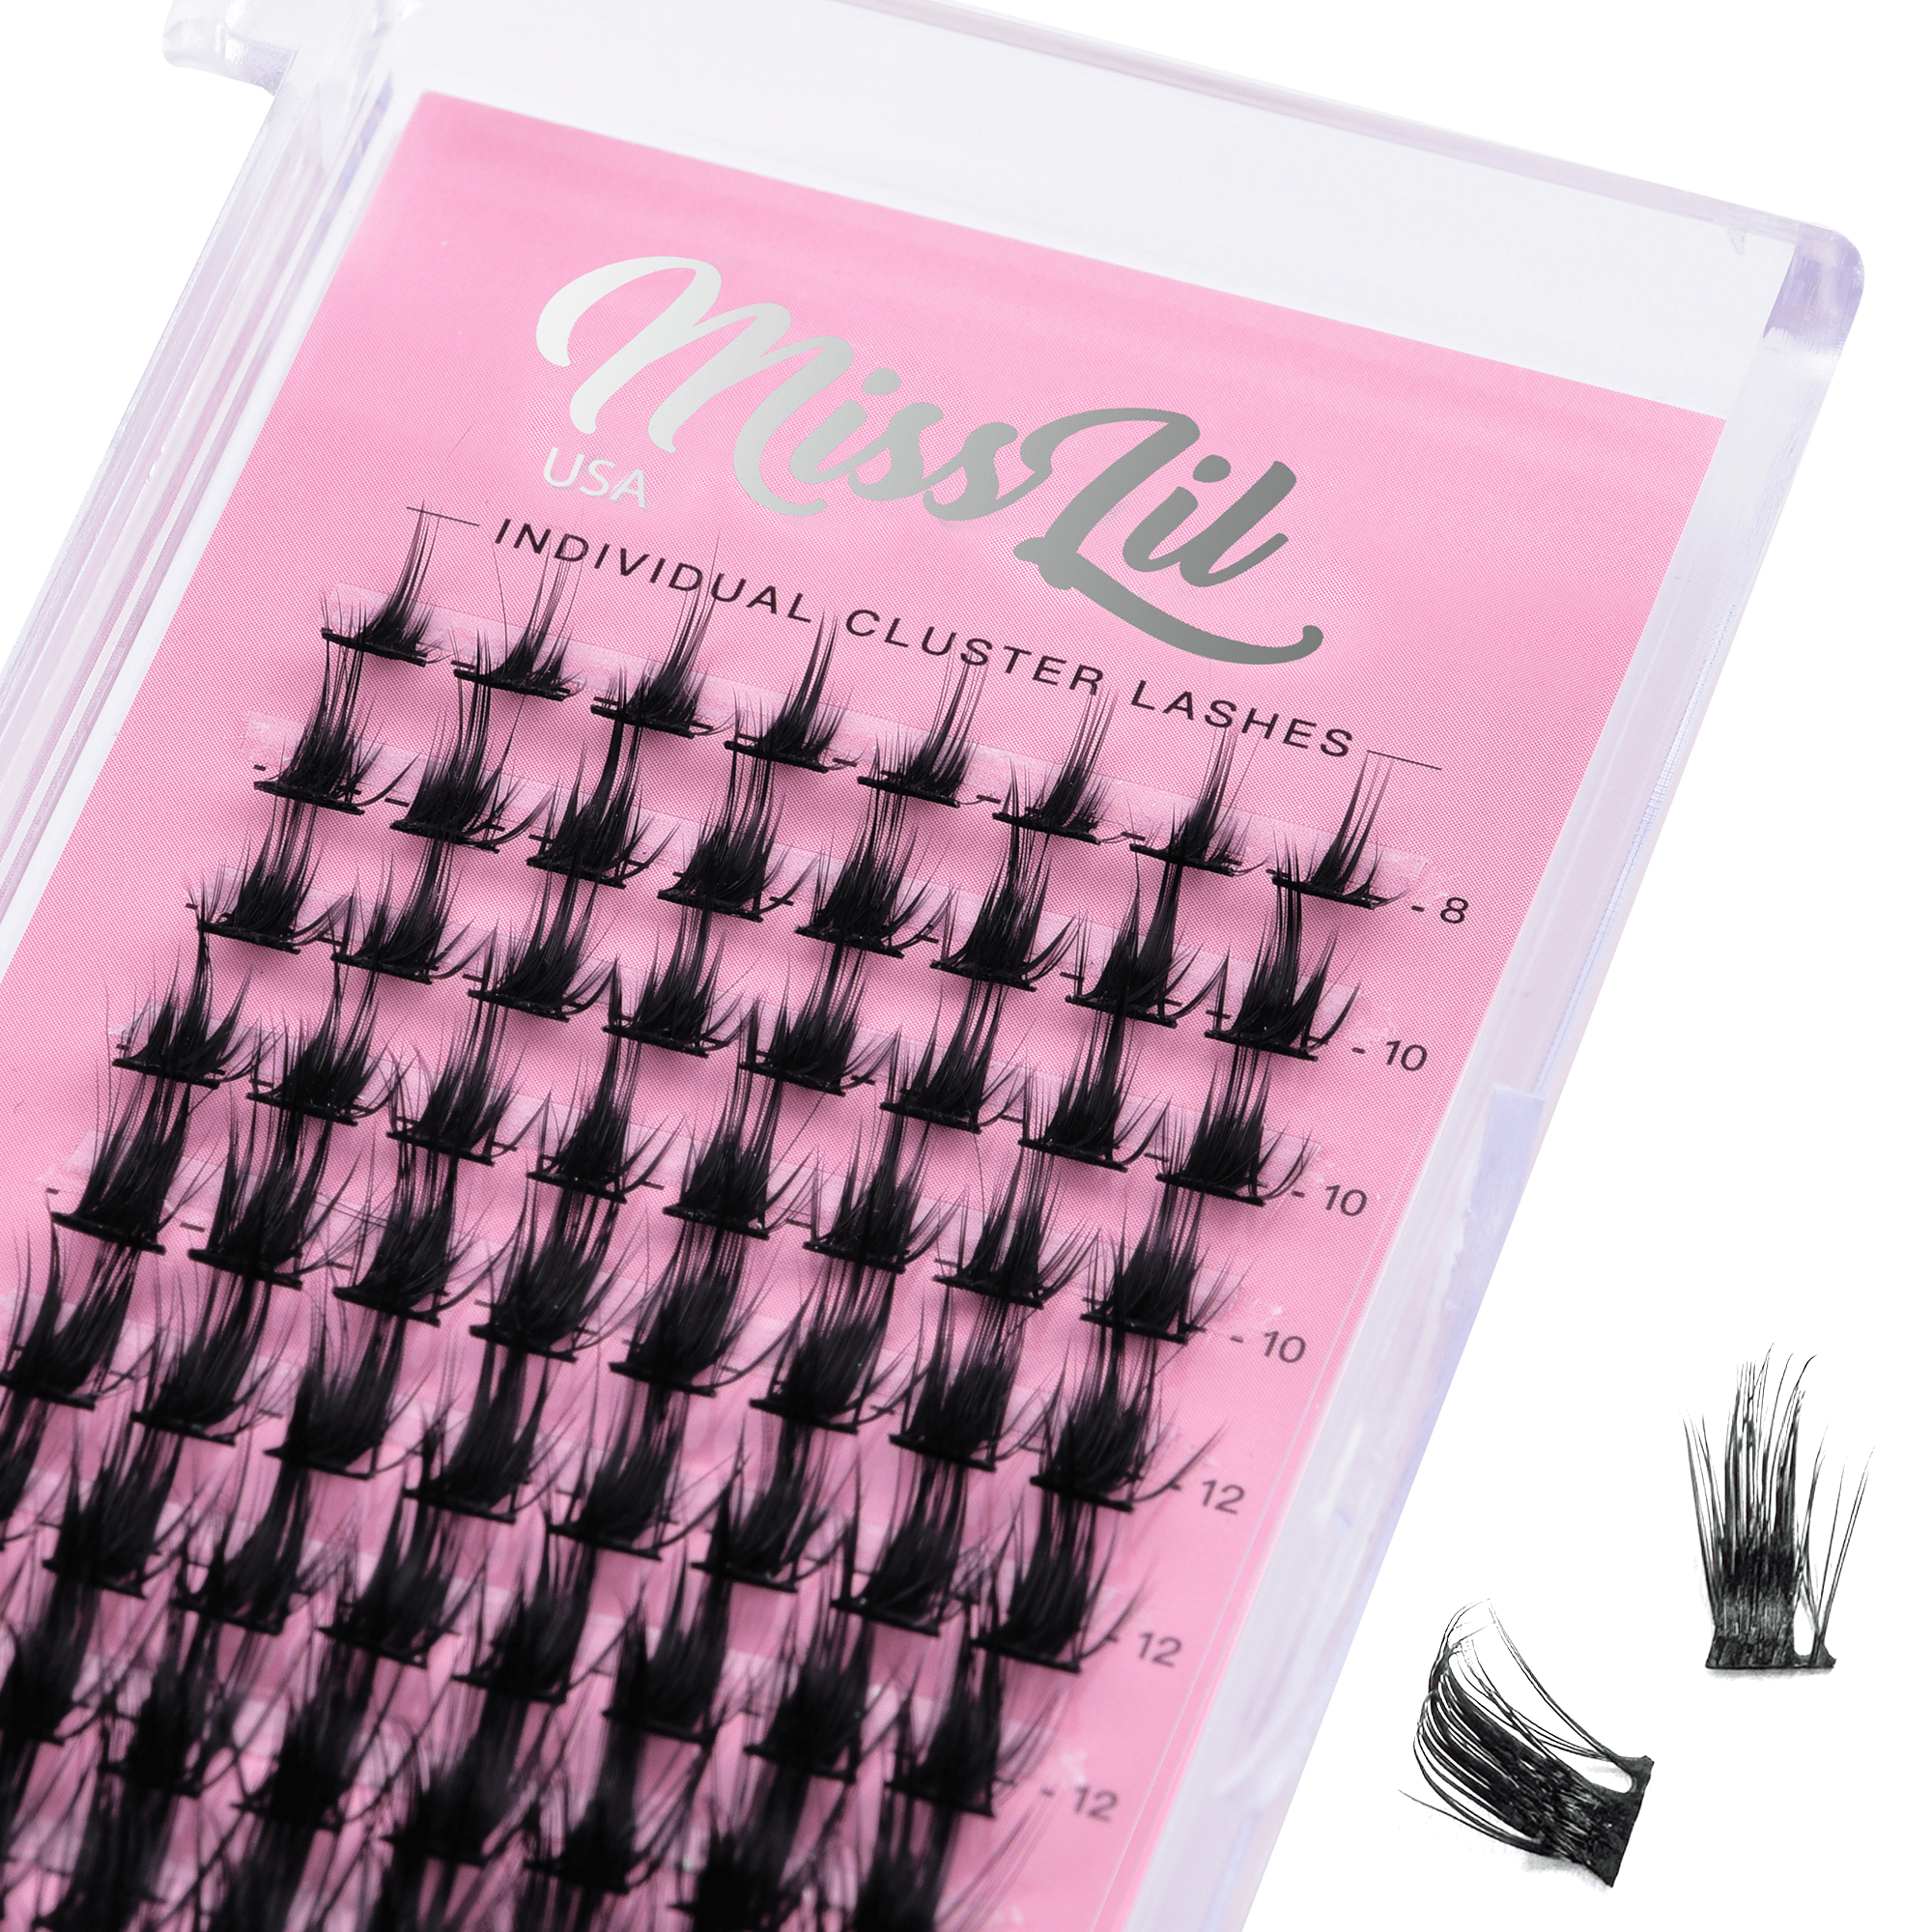 DIY Individual Cluster Lashes AD-06 MIX - Miss Lil USA